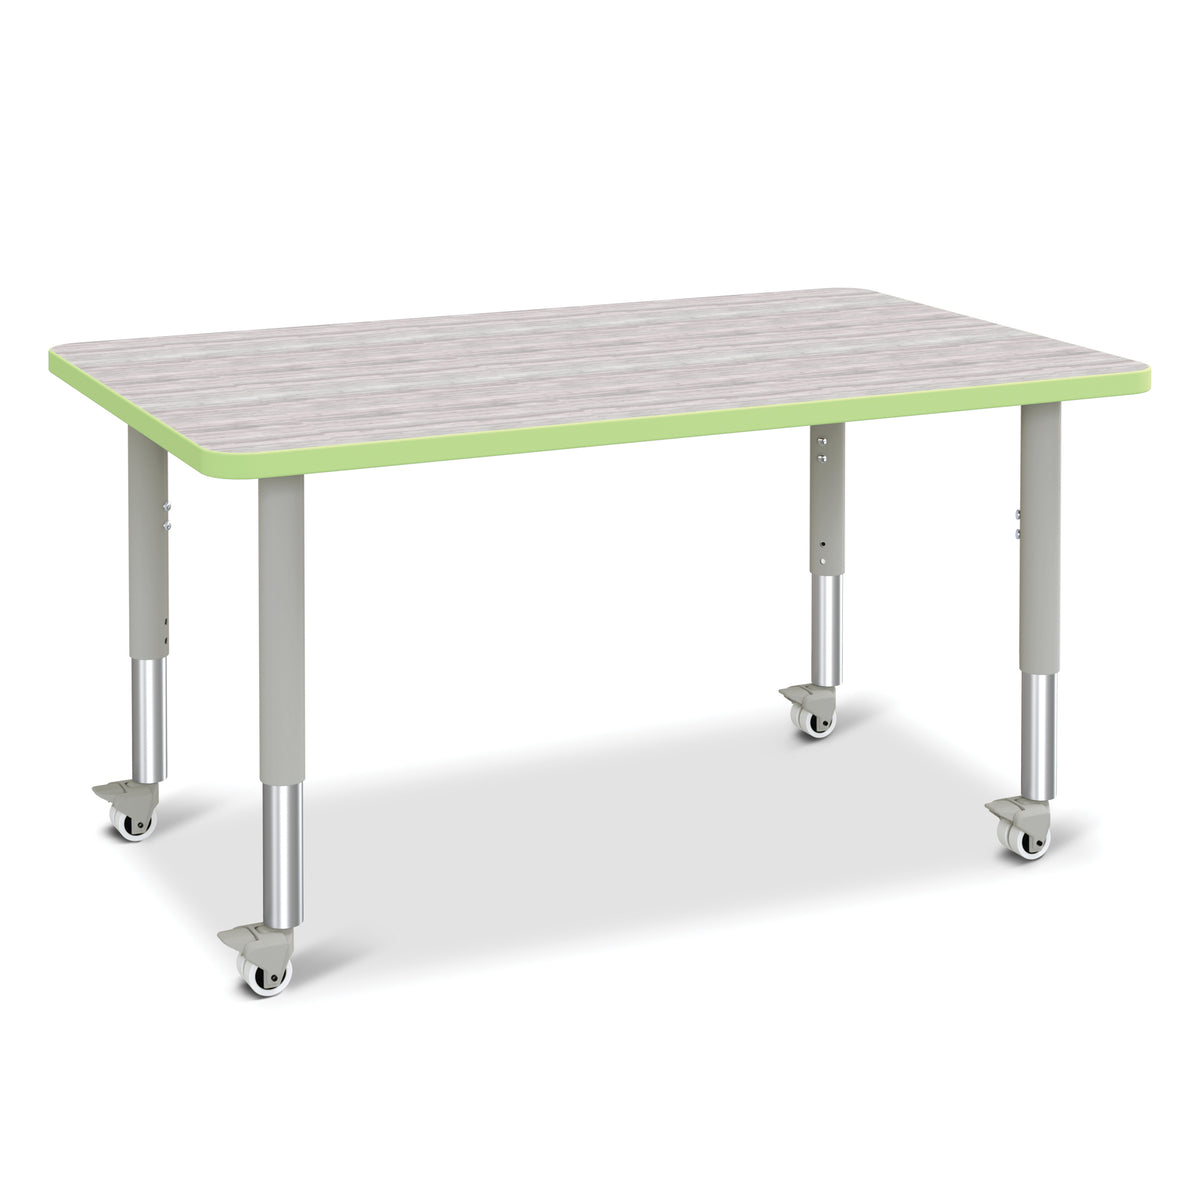 6473JCM451, Berries Rectangle Activity Table - 30" X 48", Mobile - Driftwood Gray/Key Lime/Gray